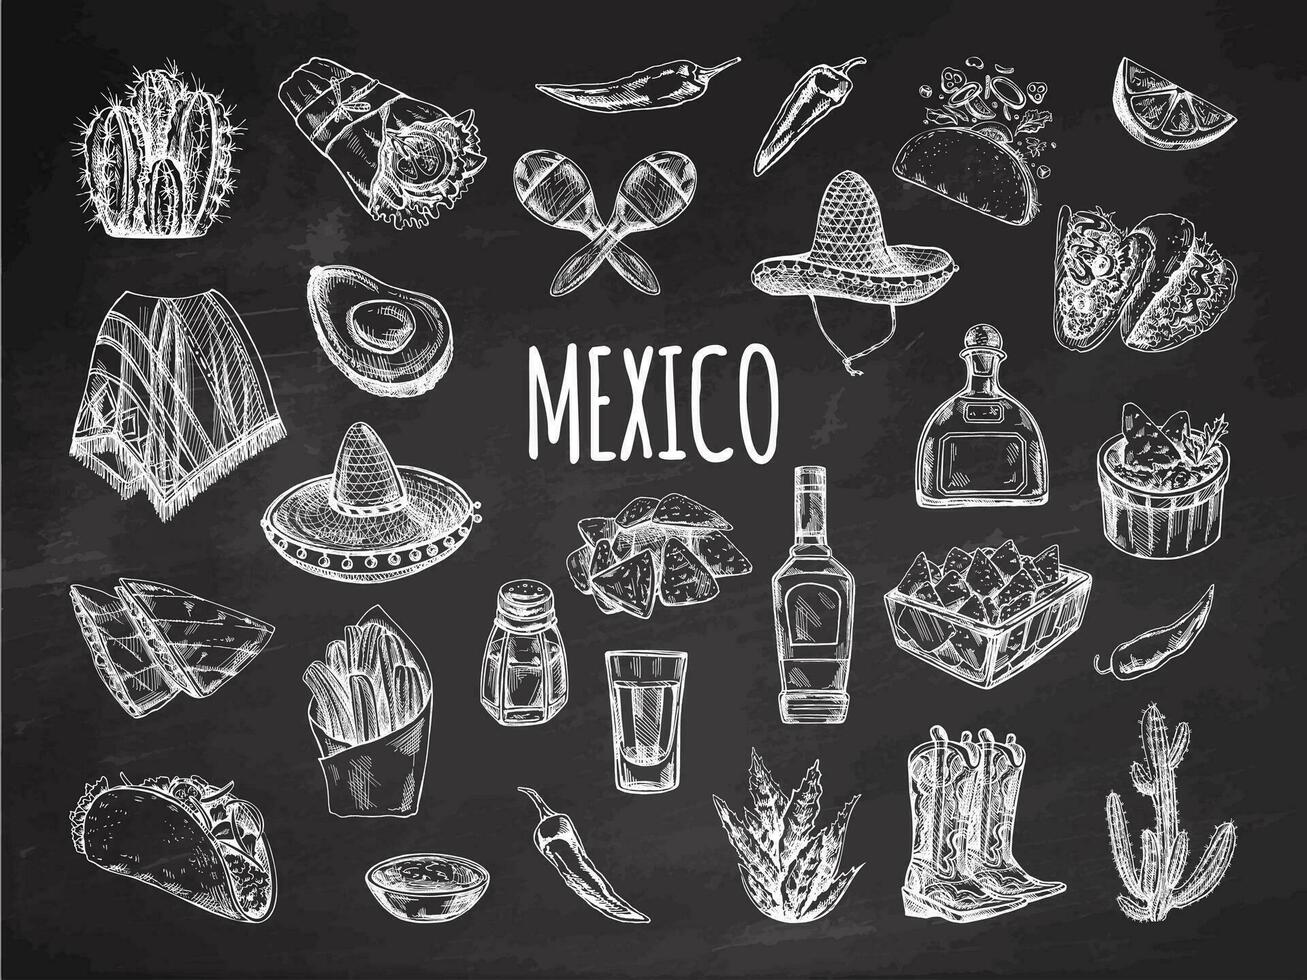 Hand-drawn set of realistic mexican elements on chalkboard background. Vintage sketch drawings of food, drinks, clothes, tools. Vector ink illustration. Mexican culture. Latin America.